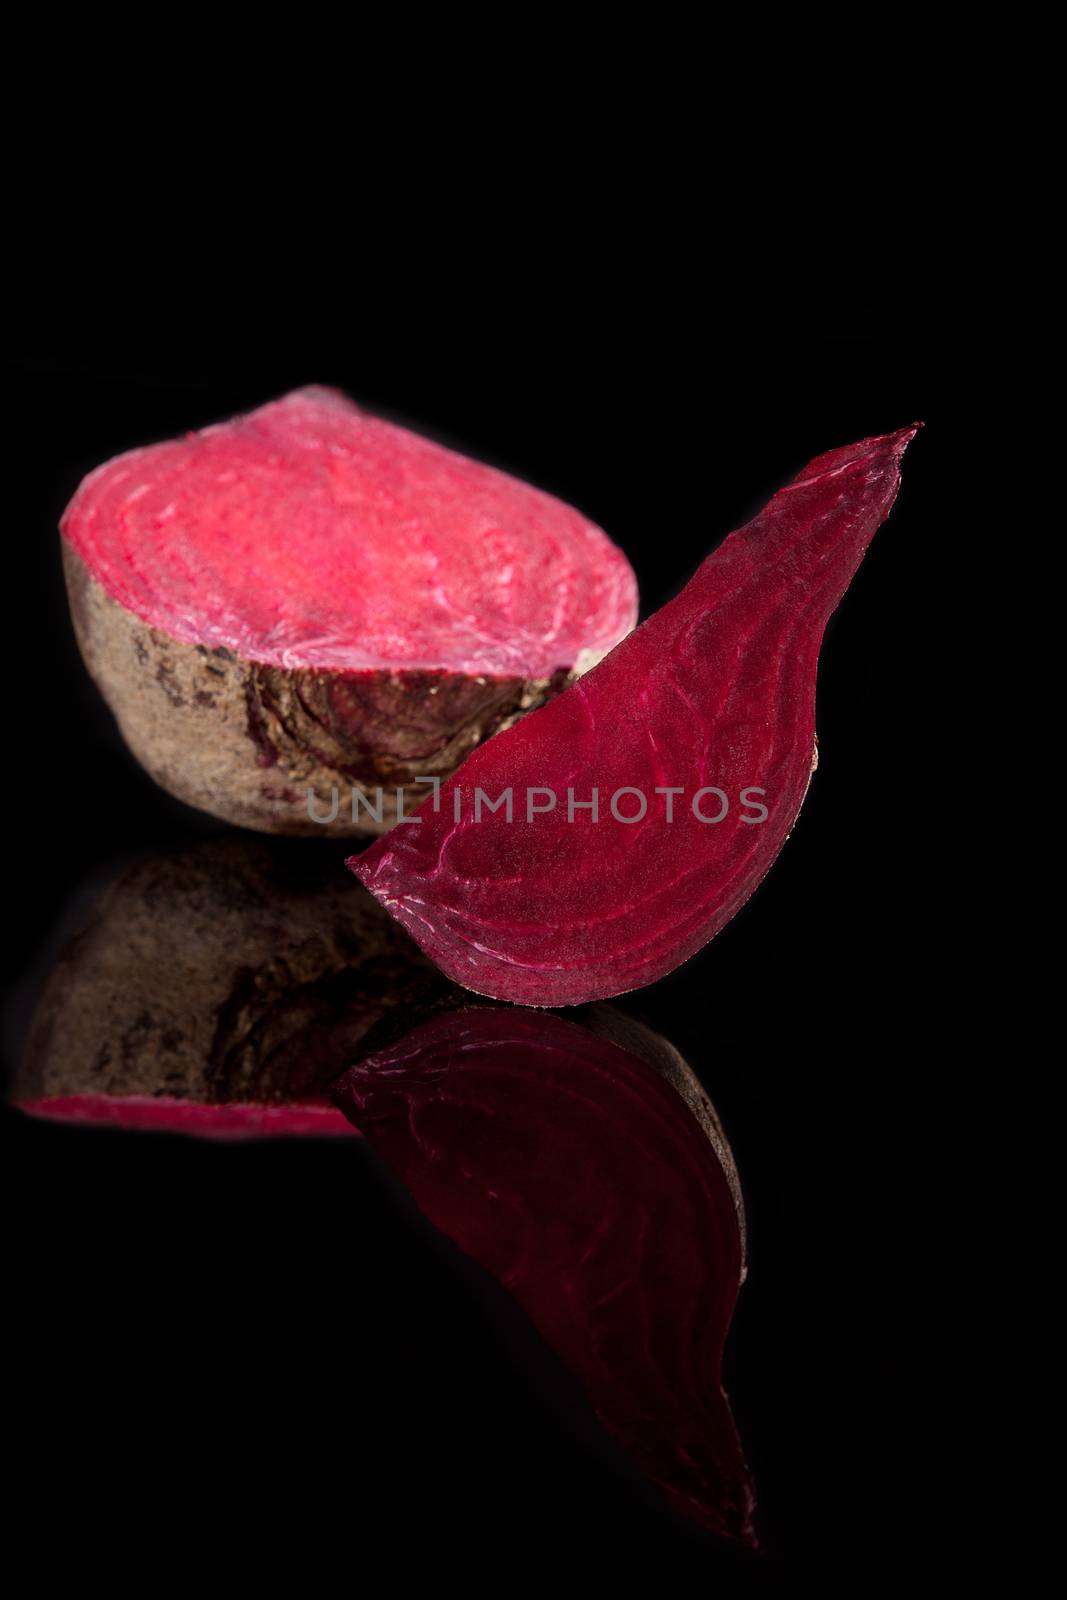 Delicious healthy purple beet isolated on black background with reflection. Luxurious culinary vegetable background.